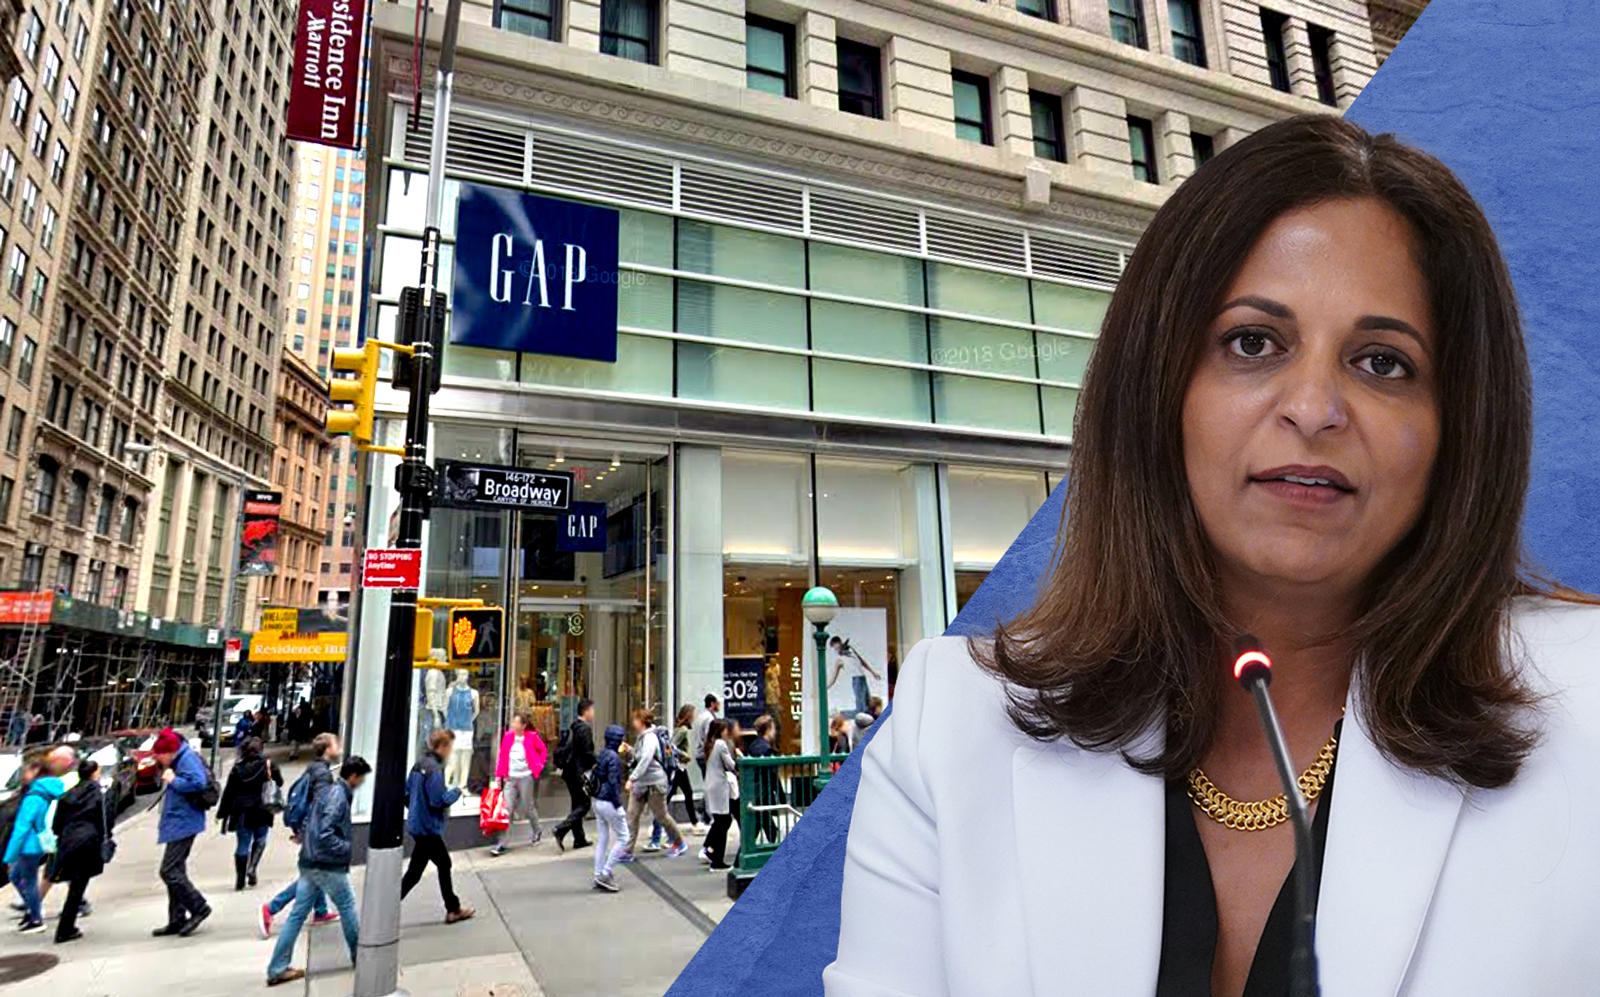 Gap at 170 Broadway and Gap CEO Sonia Syngal (Photo via Google Maps; Syngal by MANDEL NGAN/AFP via Getty Images)